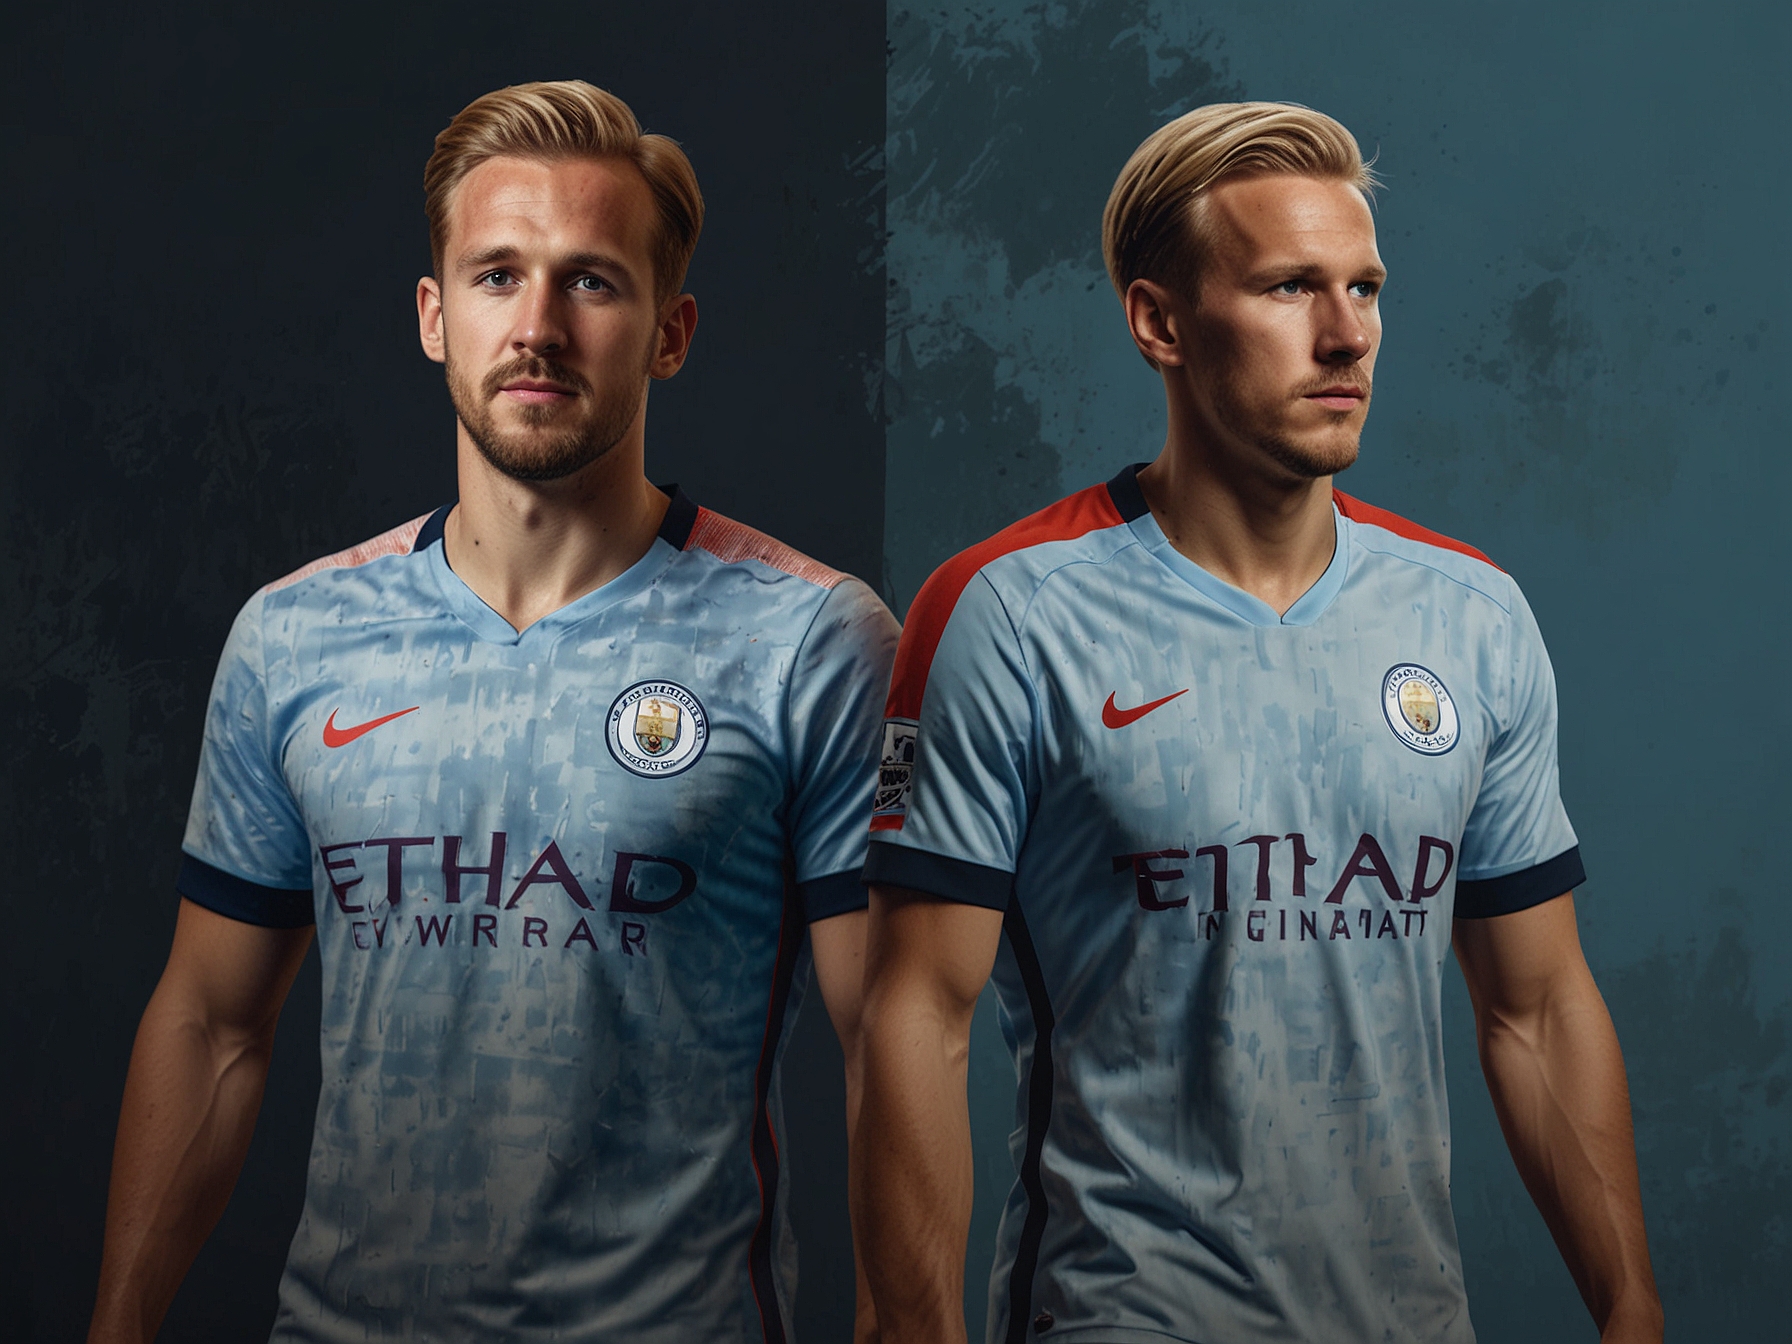 A split image of Harry Kane and Erling Haaland highlighting their contrasting styles of play, with Haaland shown in a Manchester City kit and Kane in an England kit.